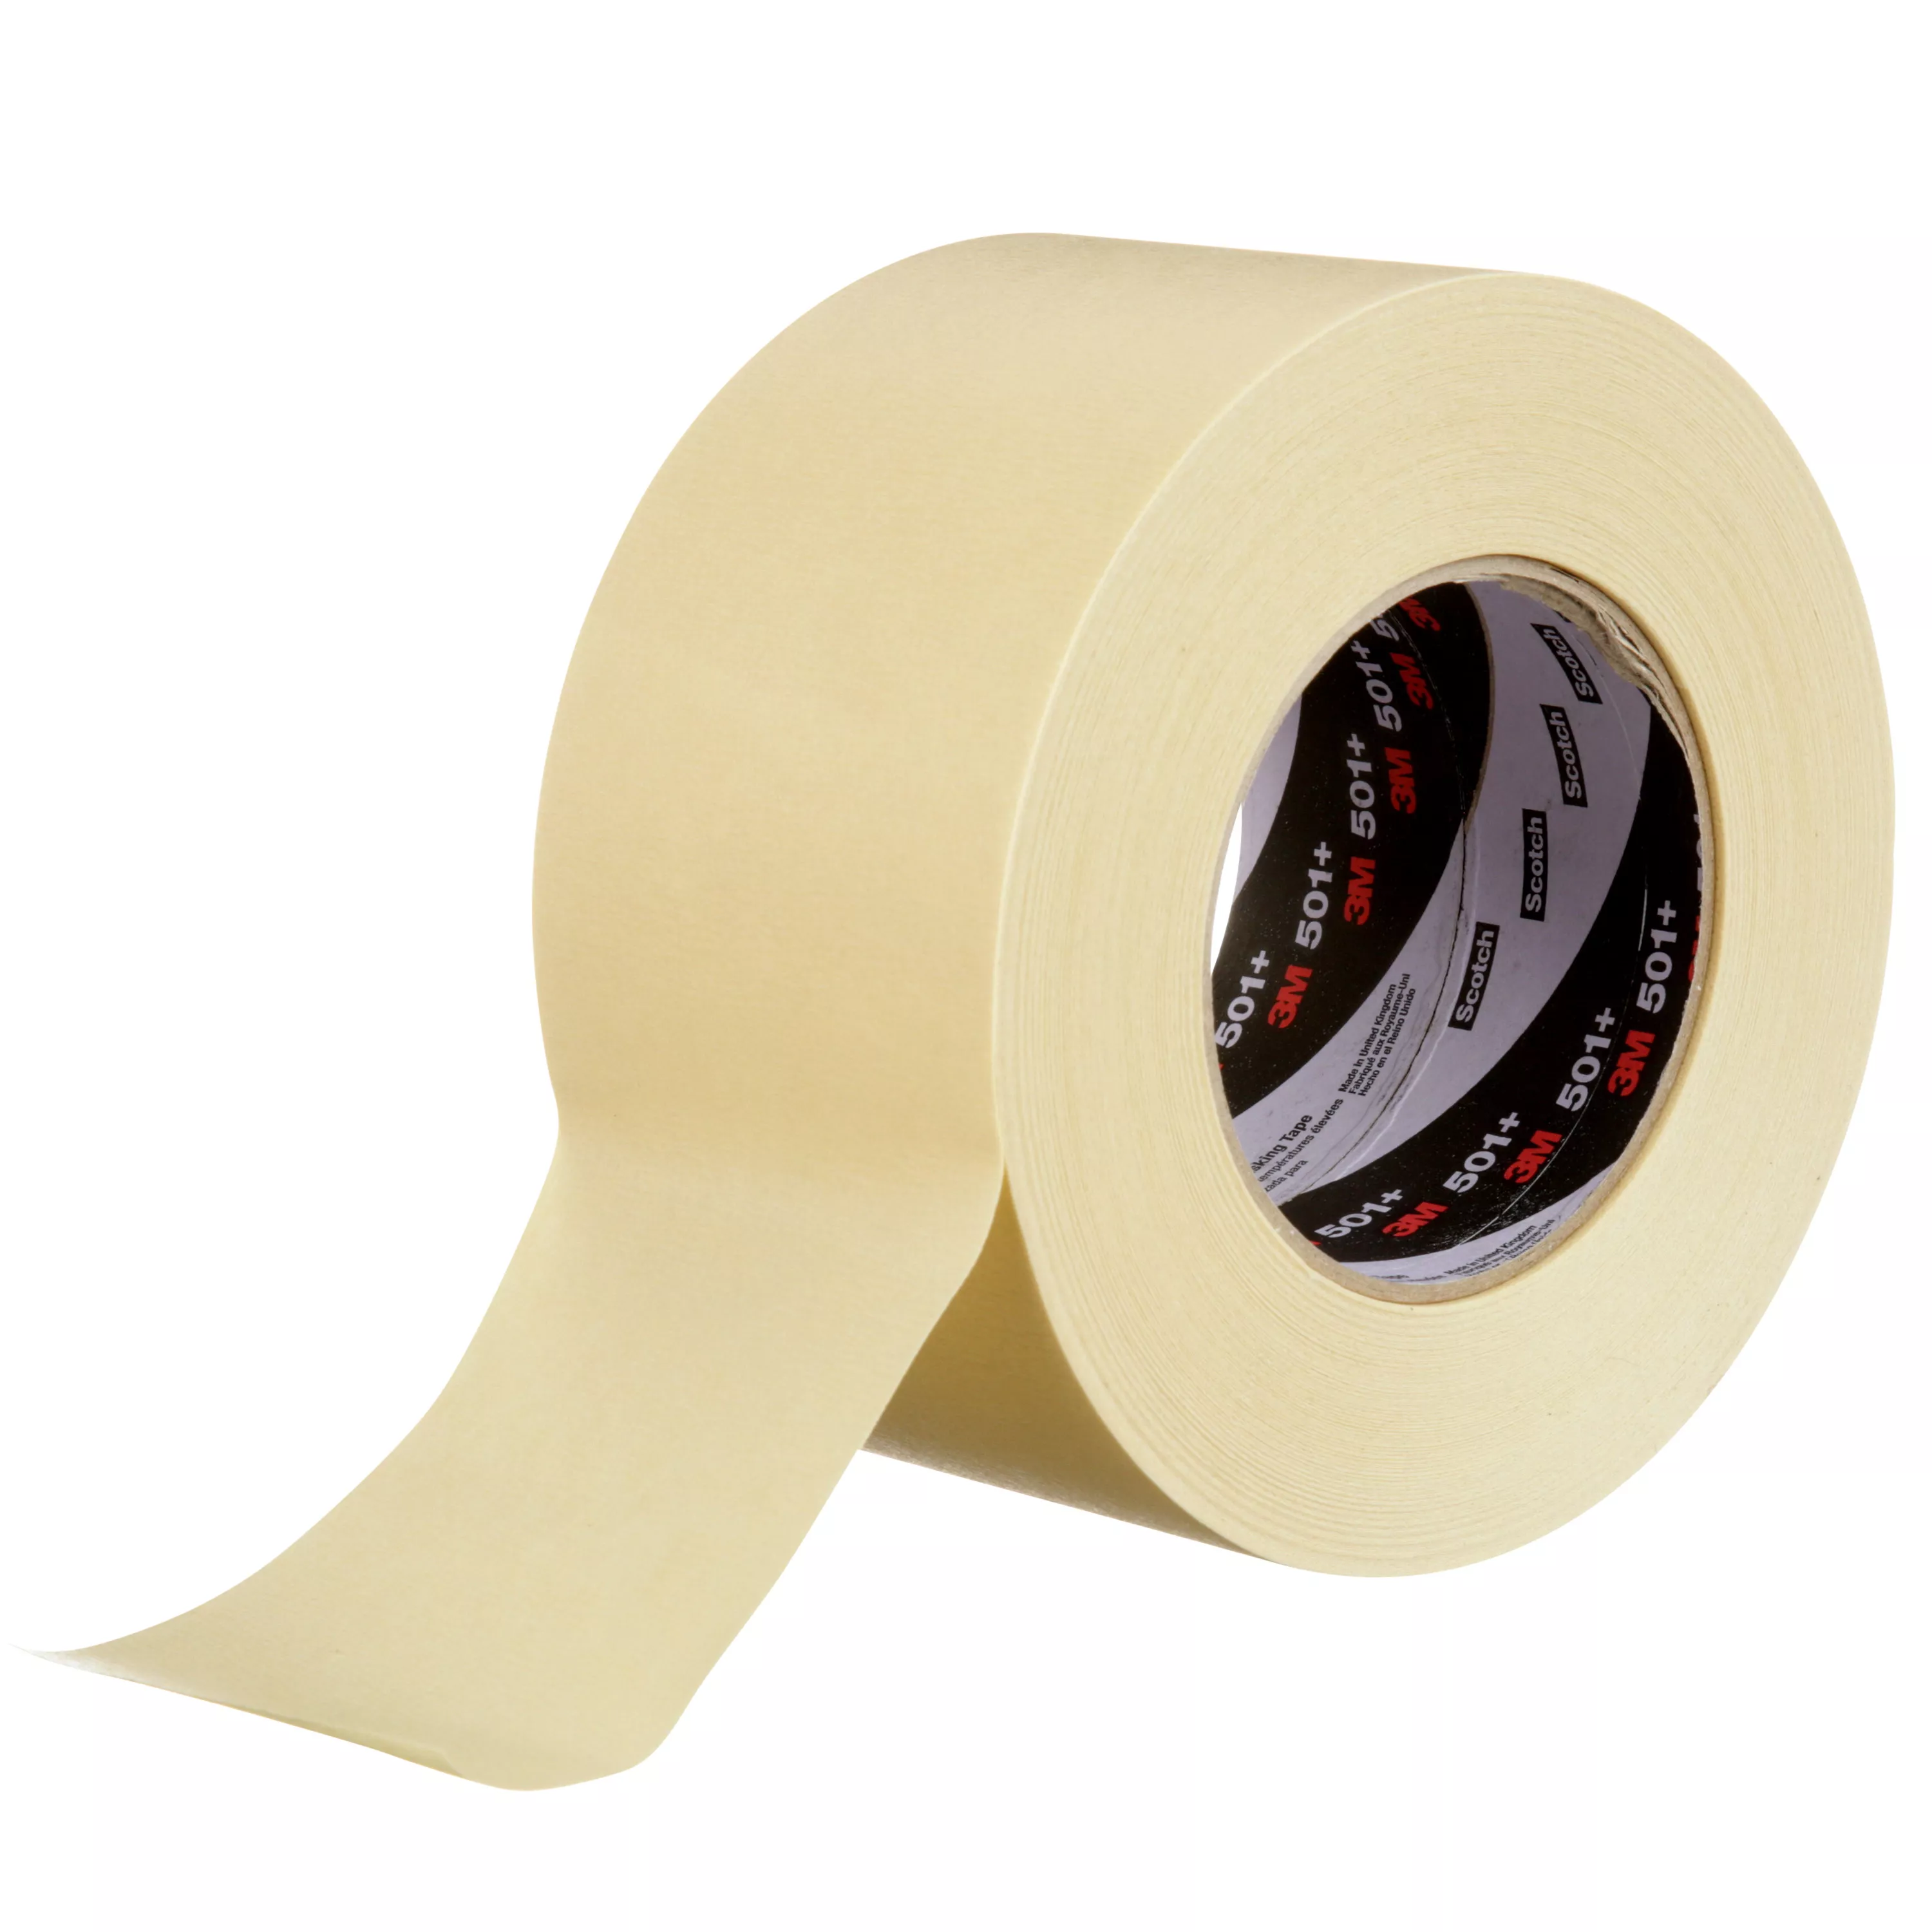 SKU 7000138489 | 3M™ Specialty High Temperature Masking Tape 501+